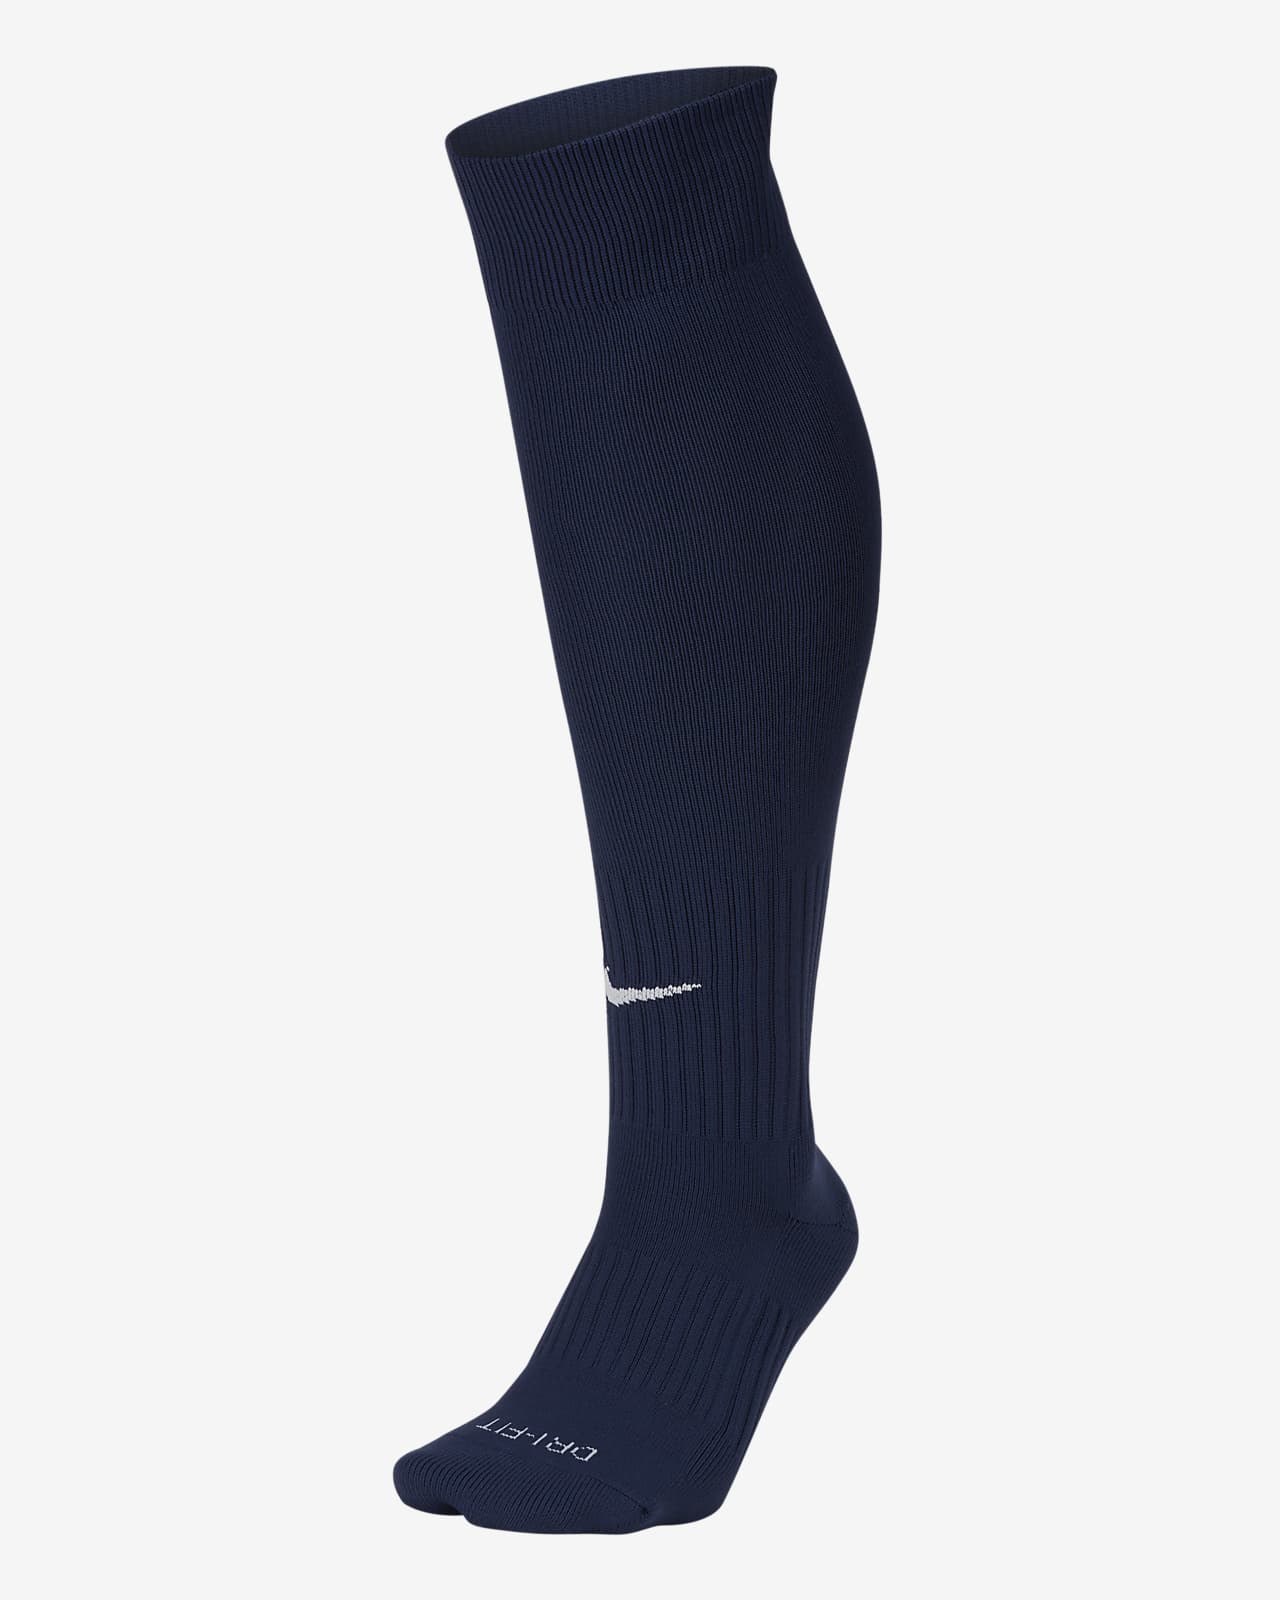 Nike Classic 2 Cushioned gedämpfte Over-the-Calf Socken